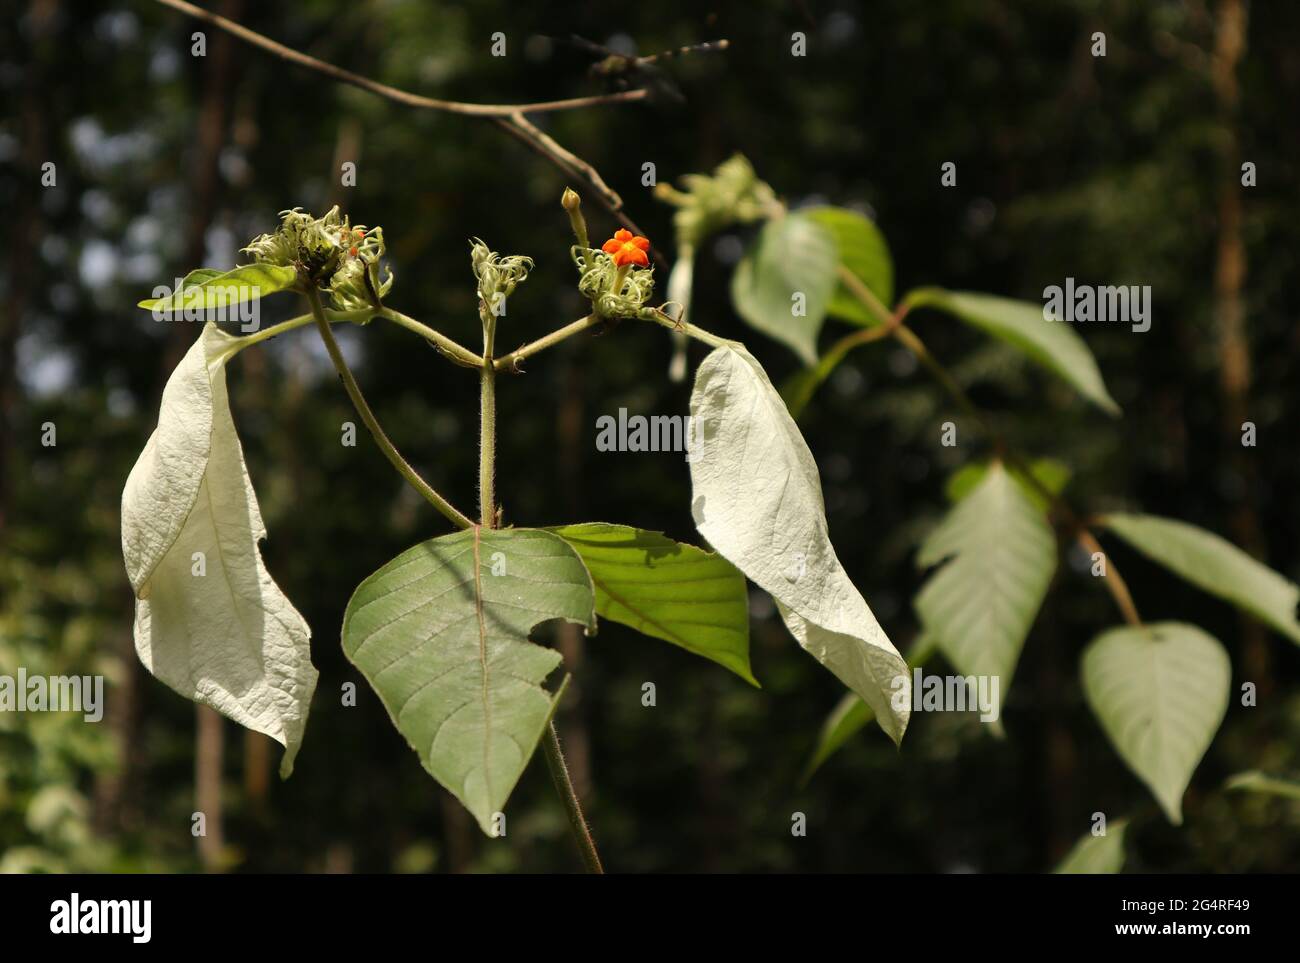 Beautiful view of a Mussaenda branch with white and green leaves and an orange color flower Stock Photo